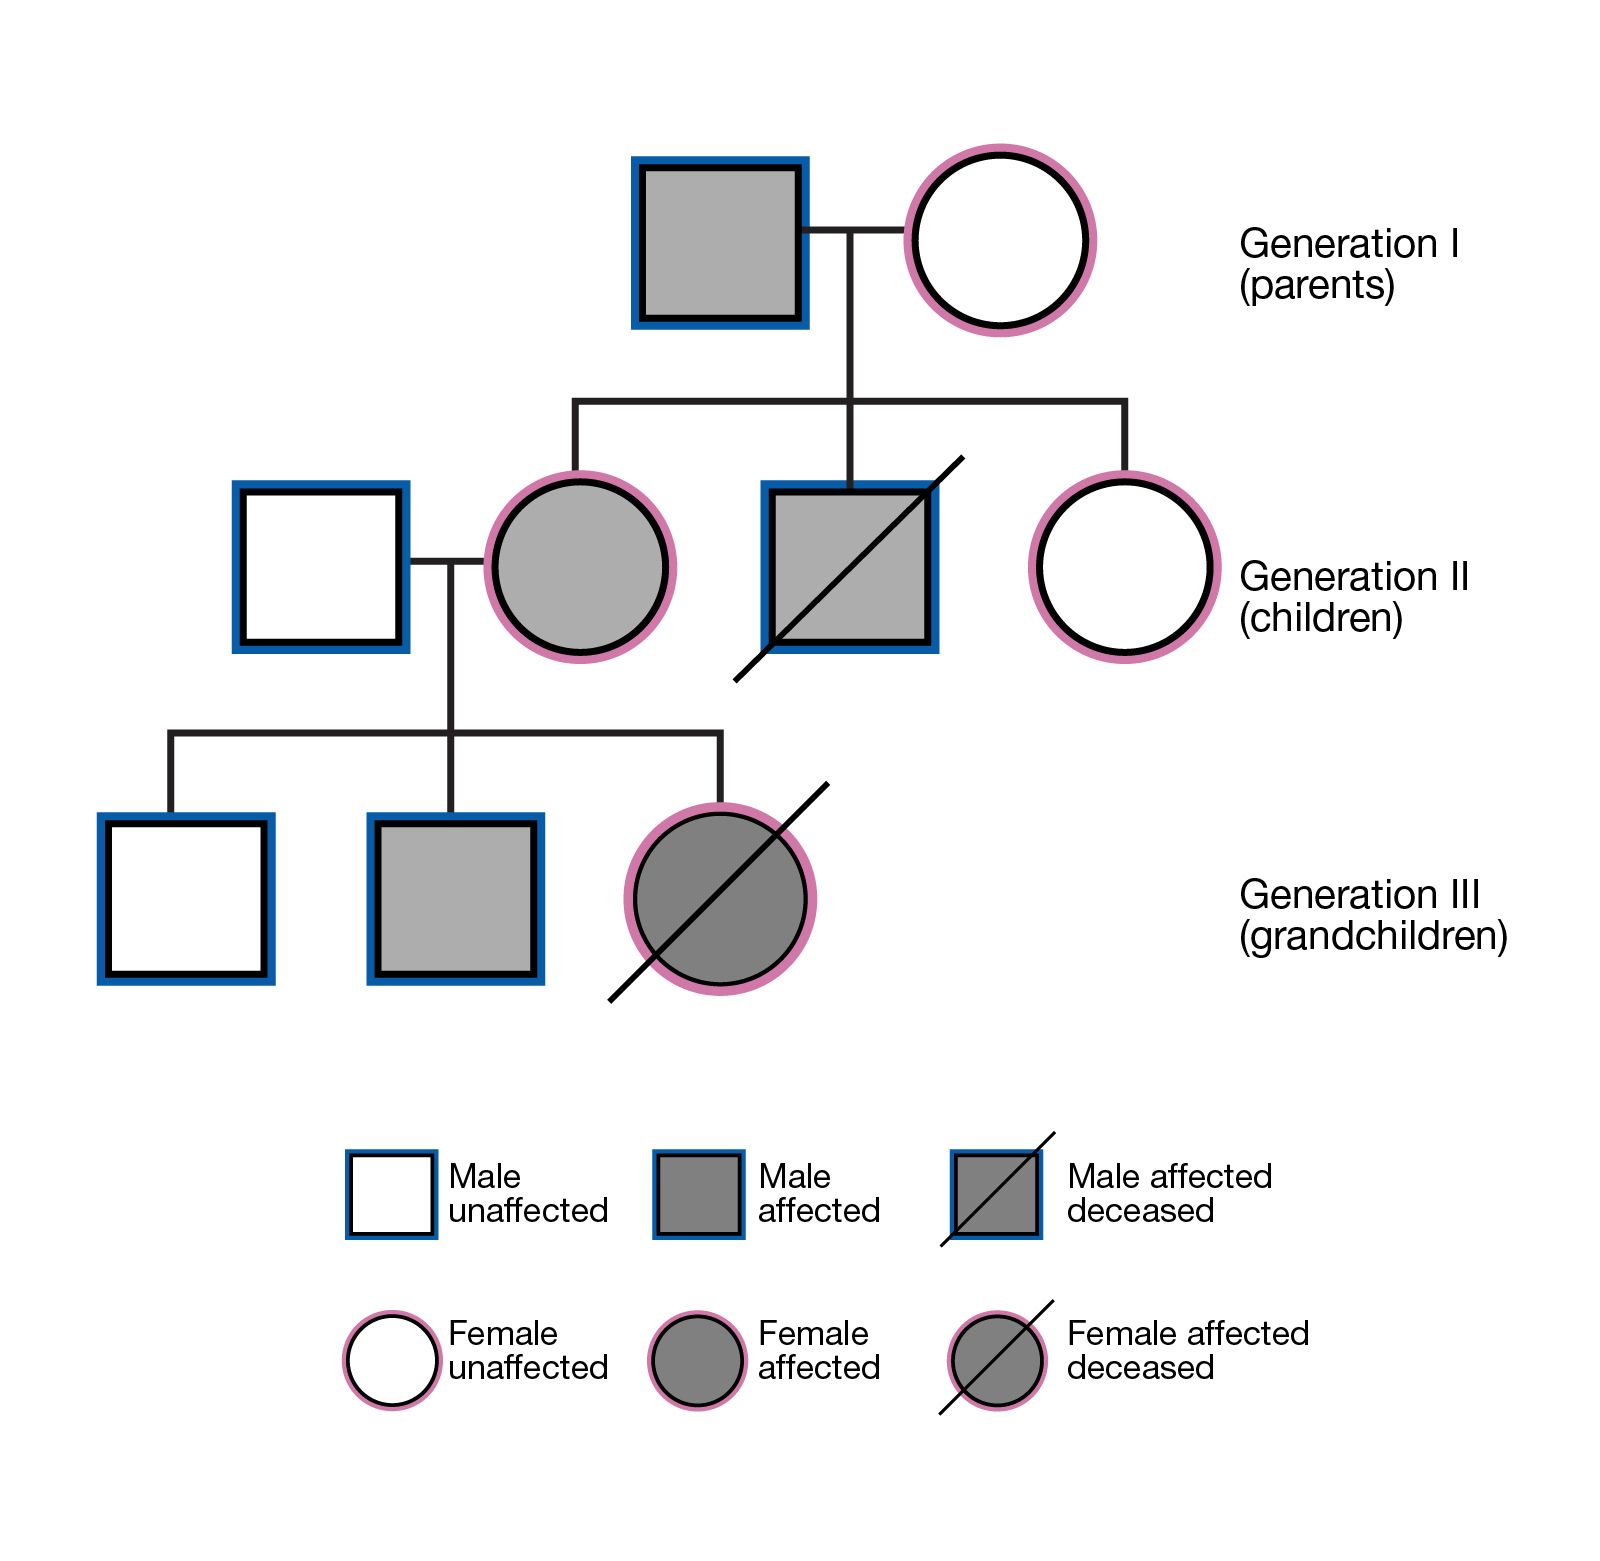 Caption: a family tree showing three generations that includes visual indications of related traits passed between each generation